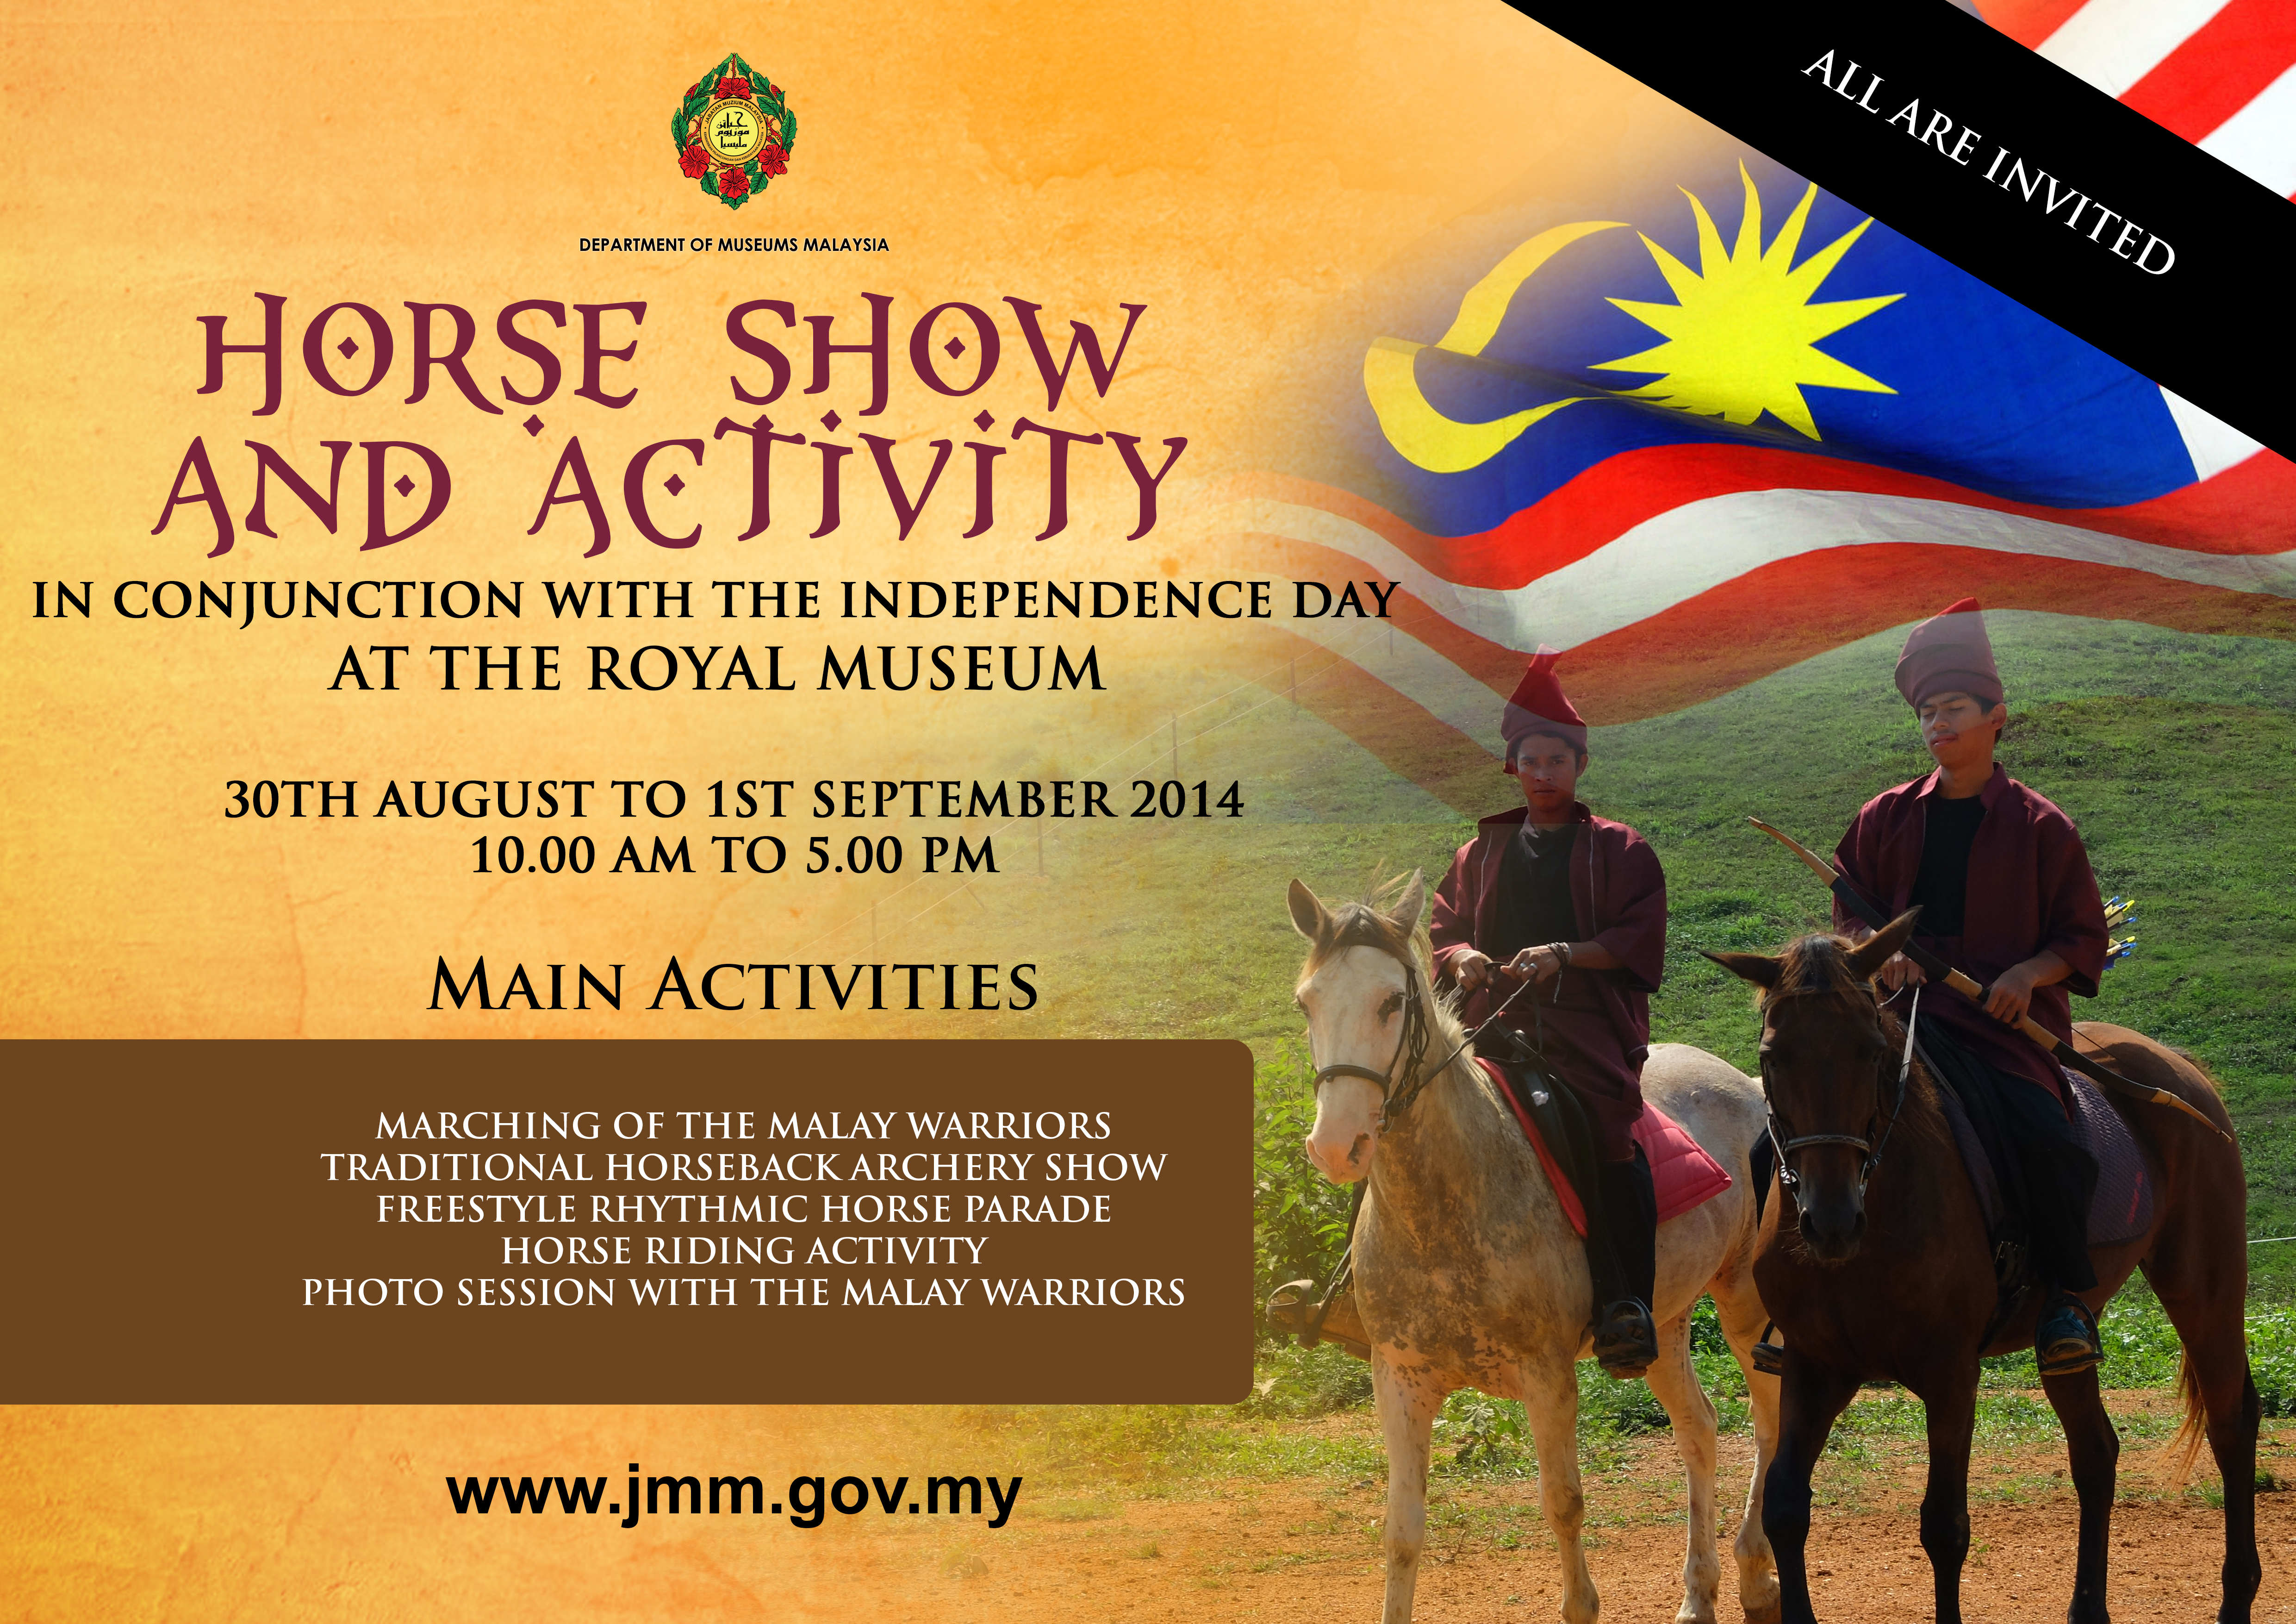 Horse Show And Activity In Conjunction With The Independence Day At The Royal Museum